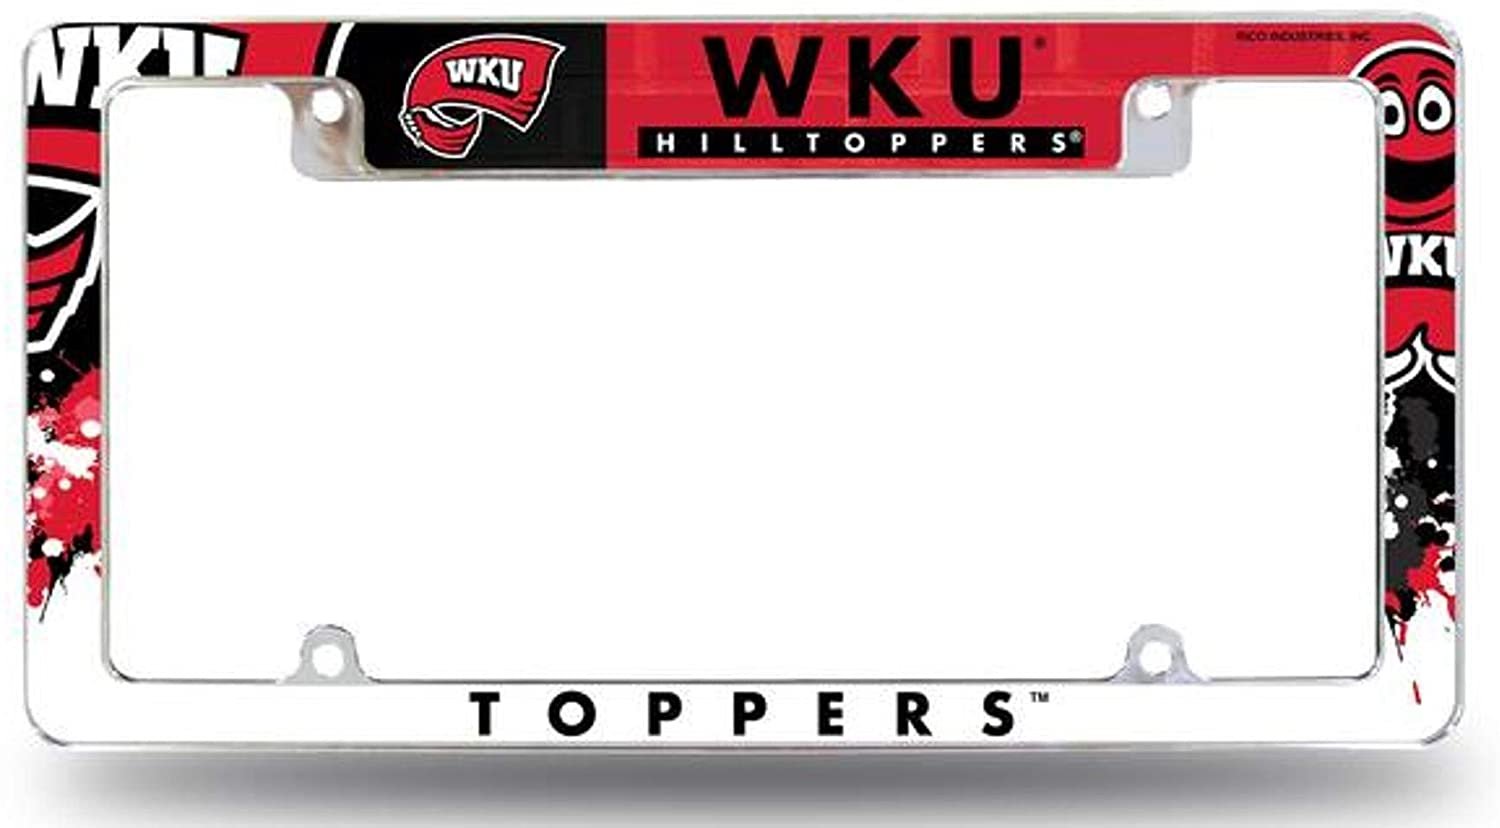 Western Kentucky University Hilltoppers Metal License Plate Frame Tag Cover, All Over Design, 12x6 Inch